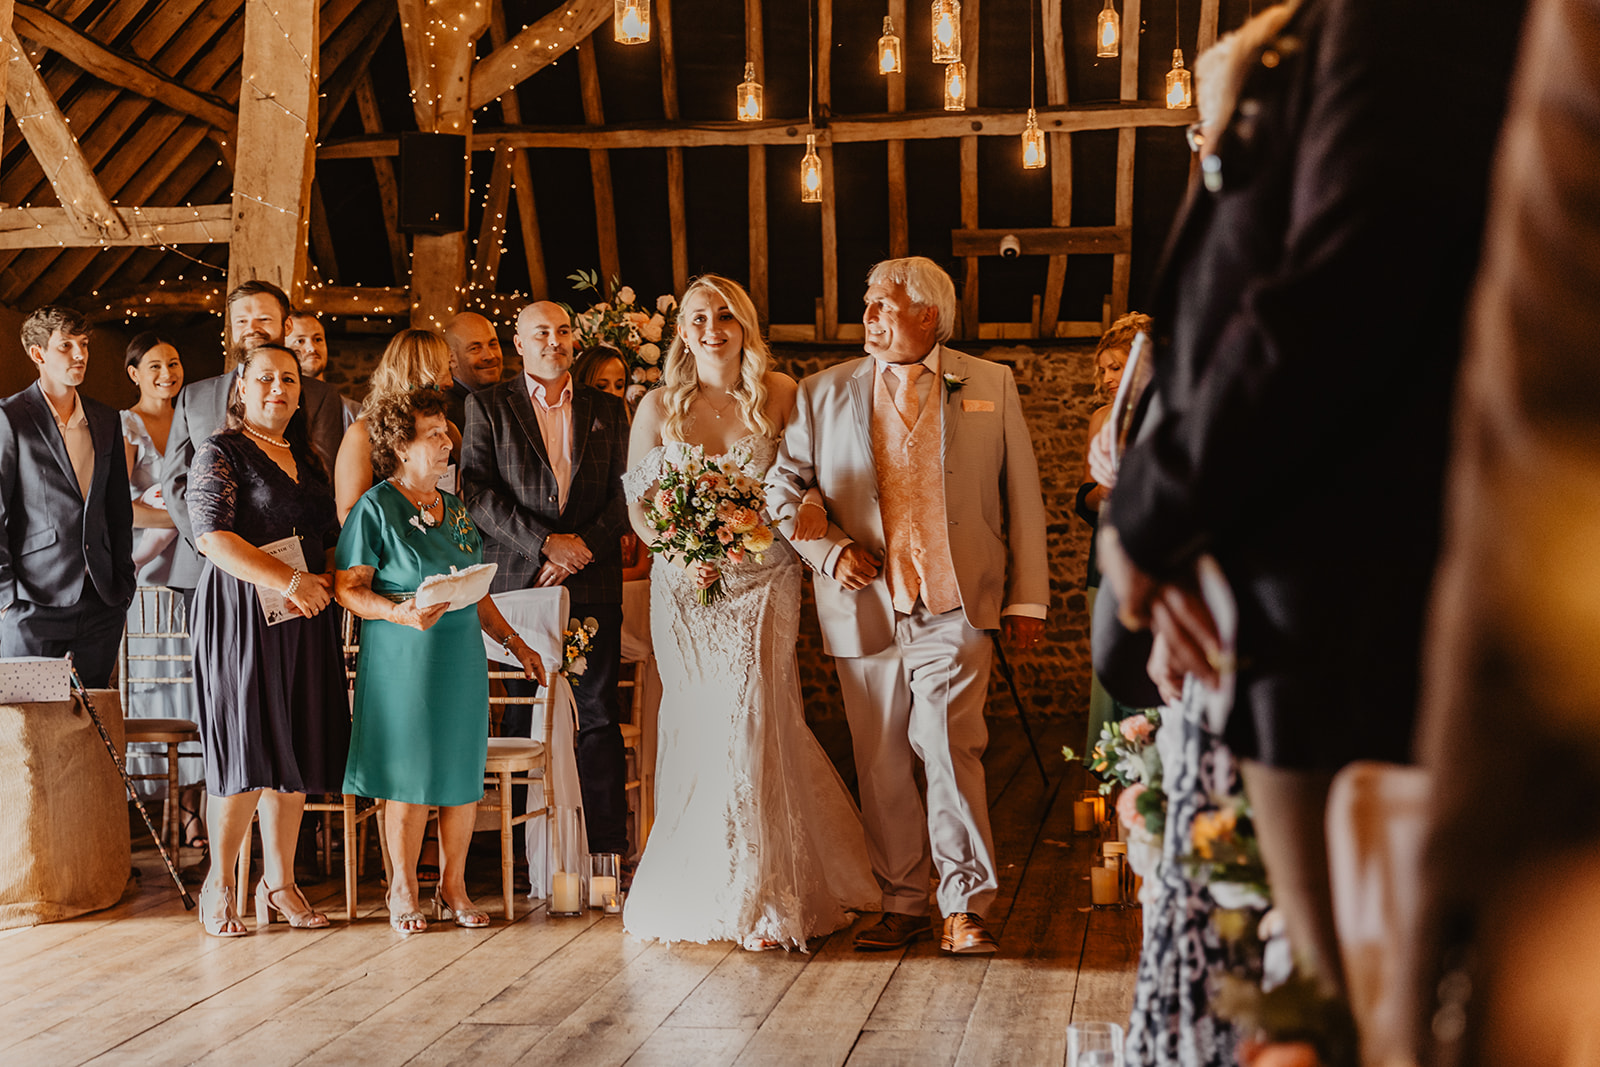 Bride and her father walking down the aisle at a Southlands barn wedding, Sussex. Photo by OliveJoy Photography.